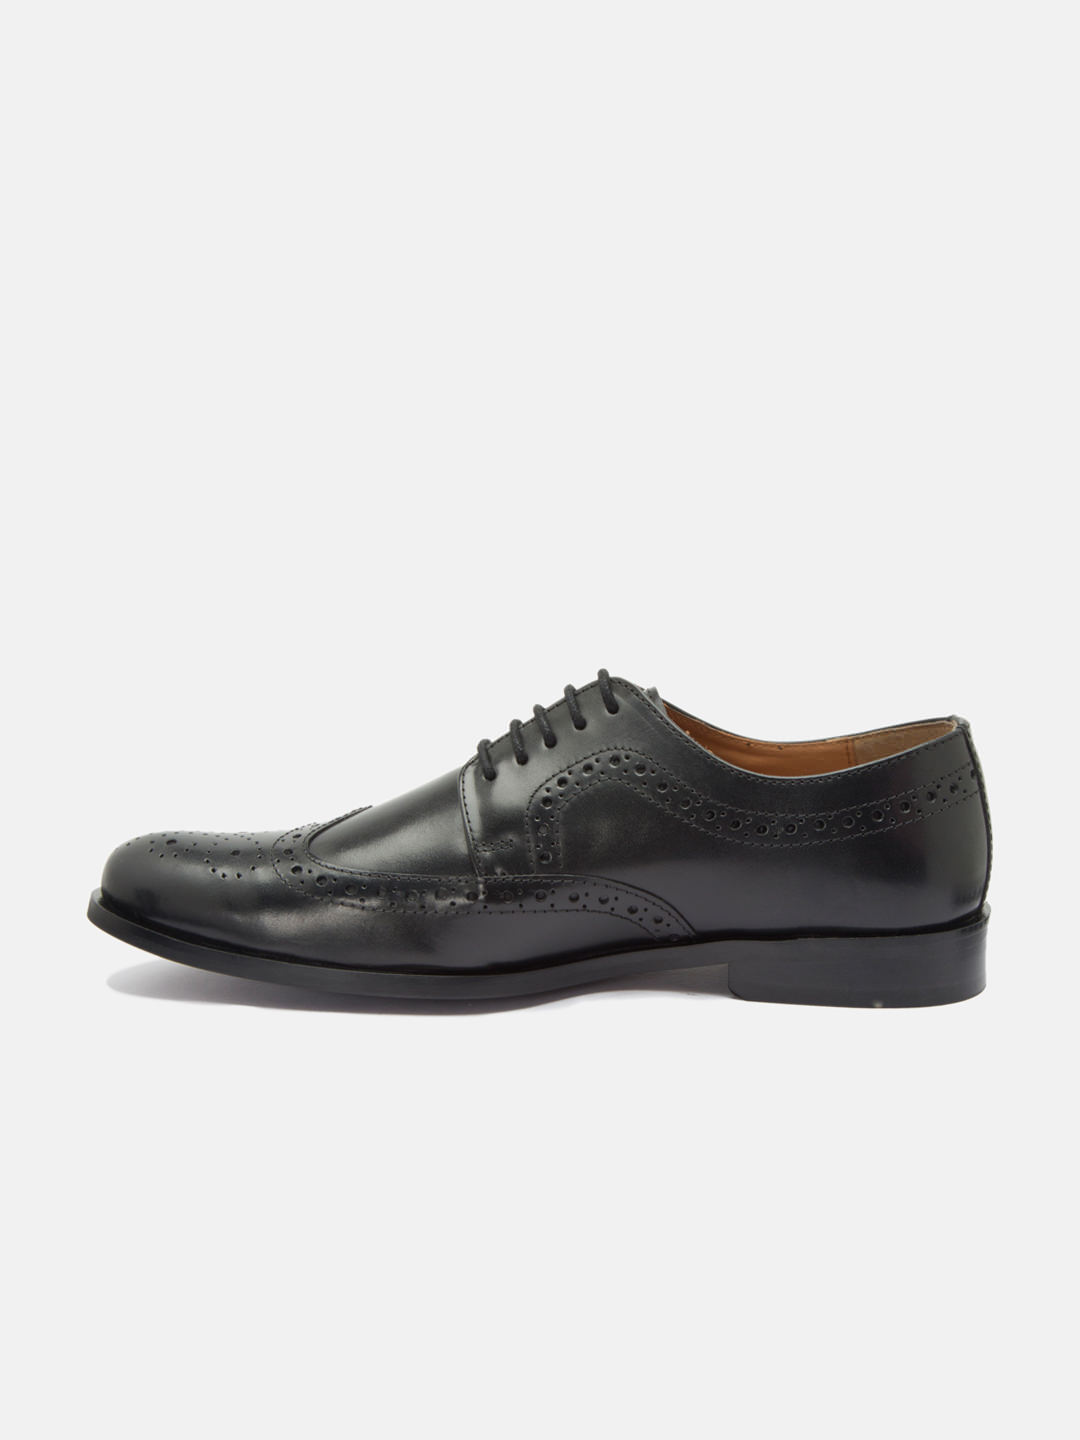 Genuine Leather Black Derby Brogues Shoes for Men's